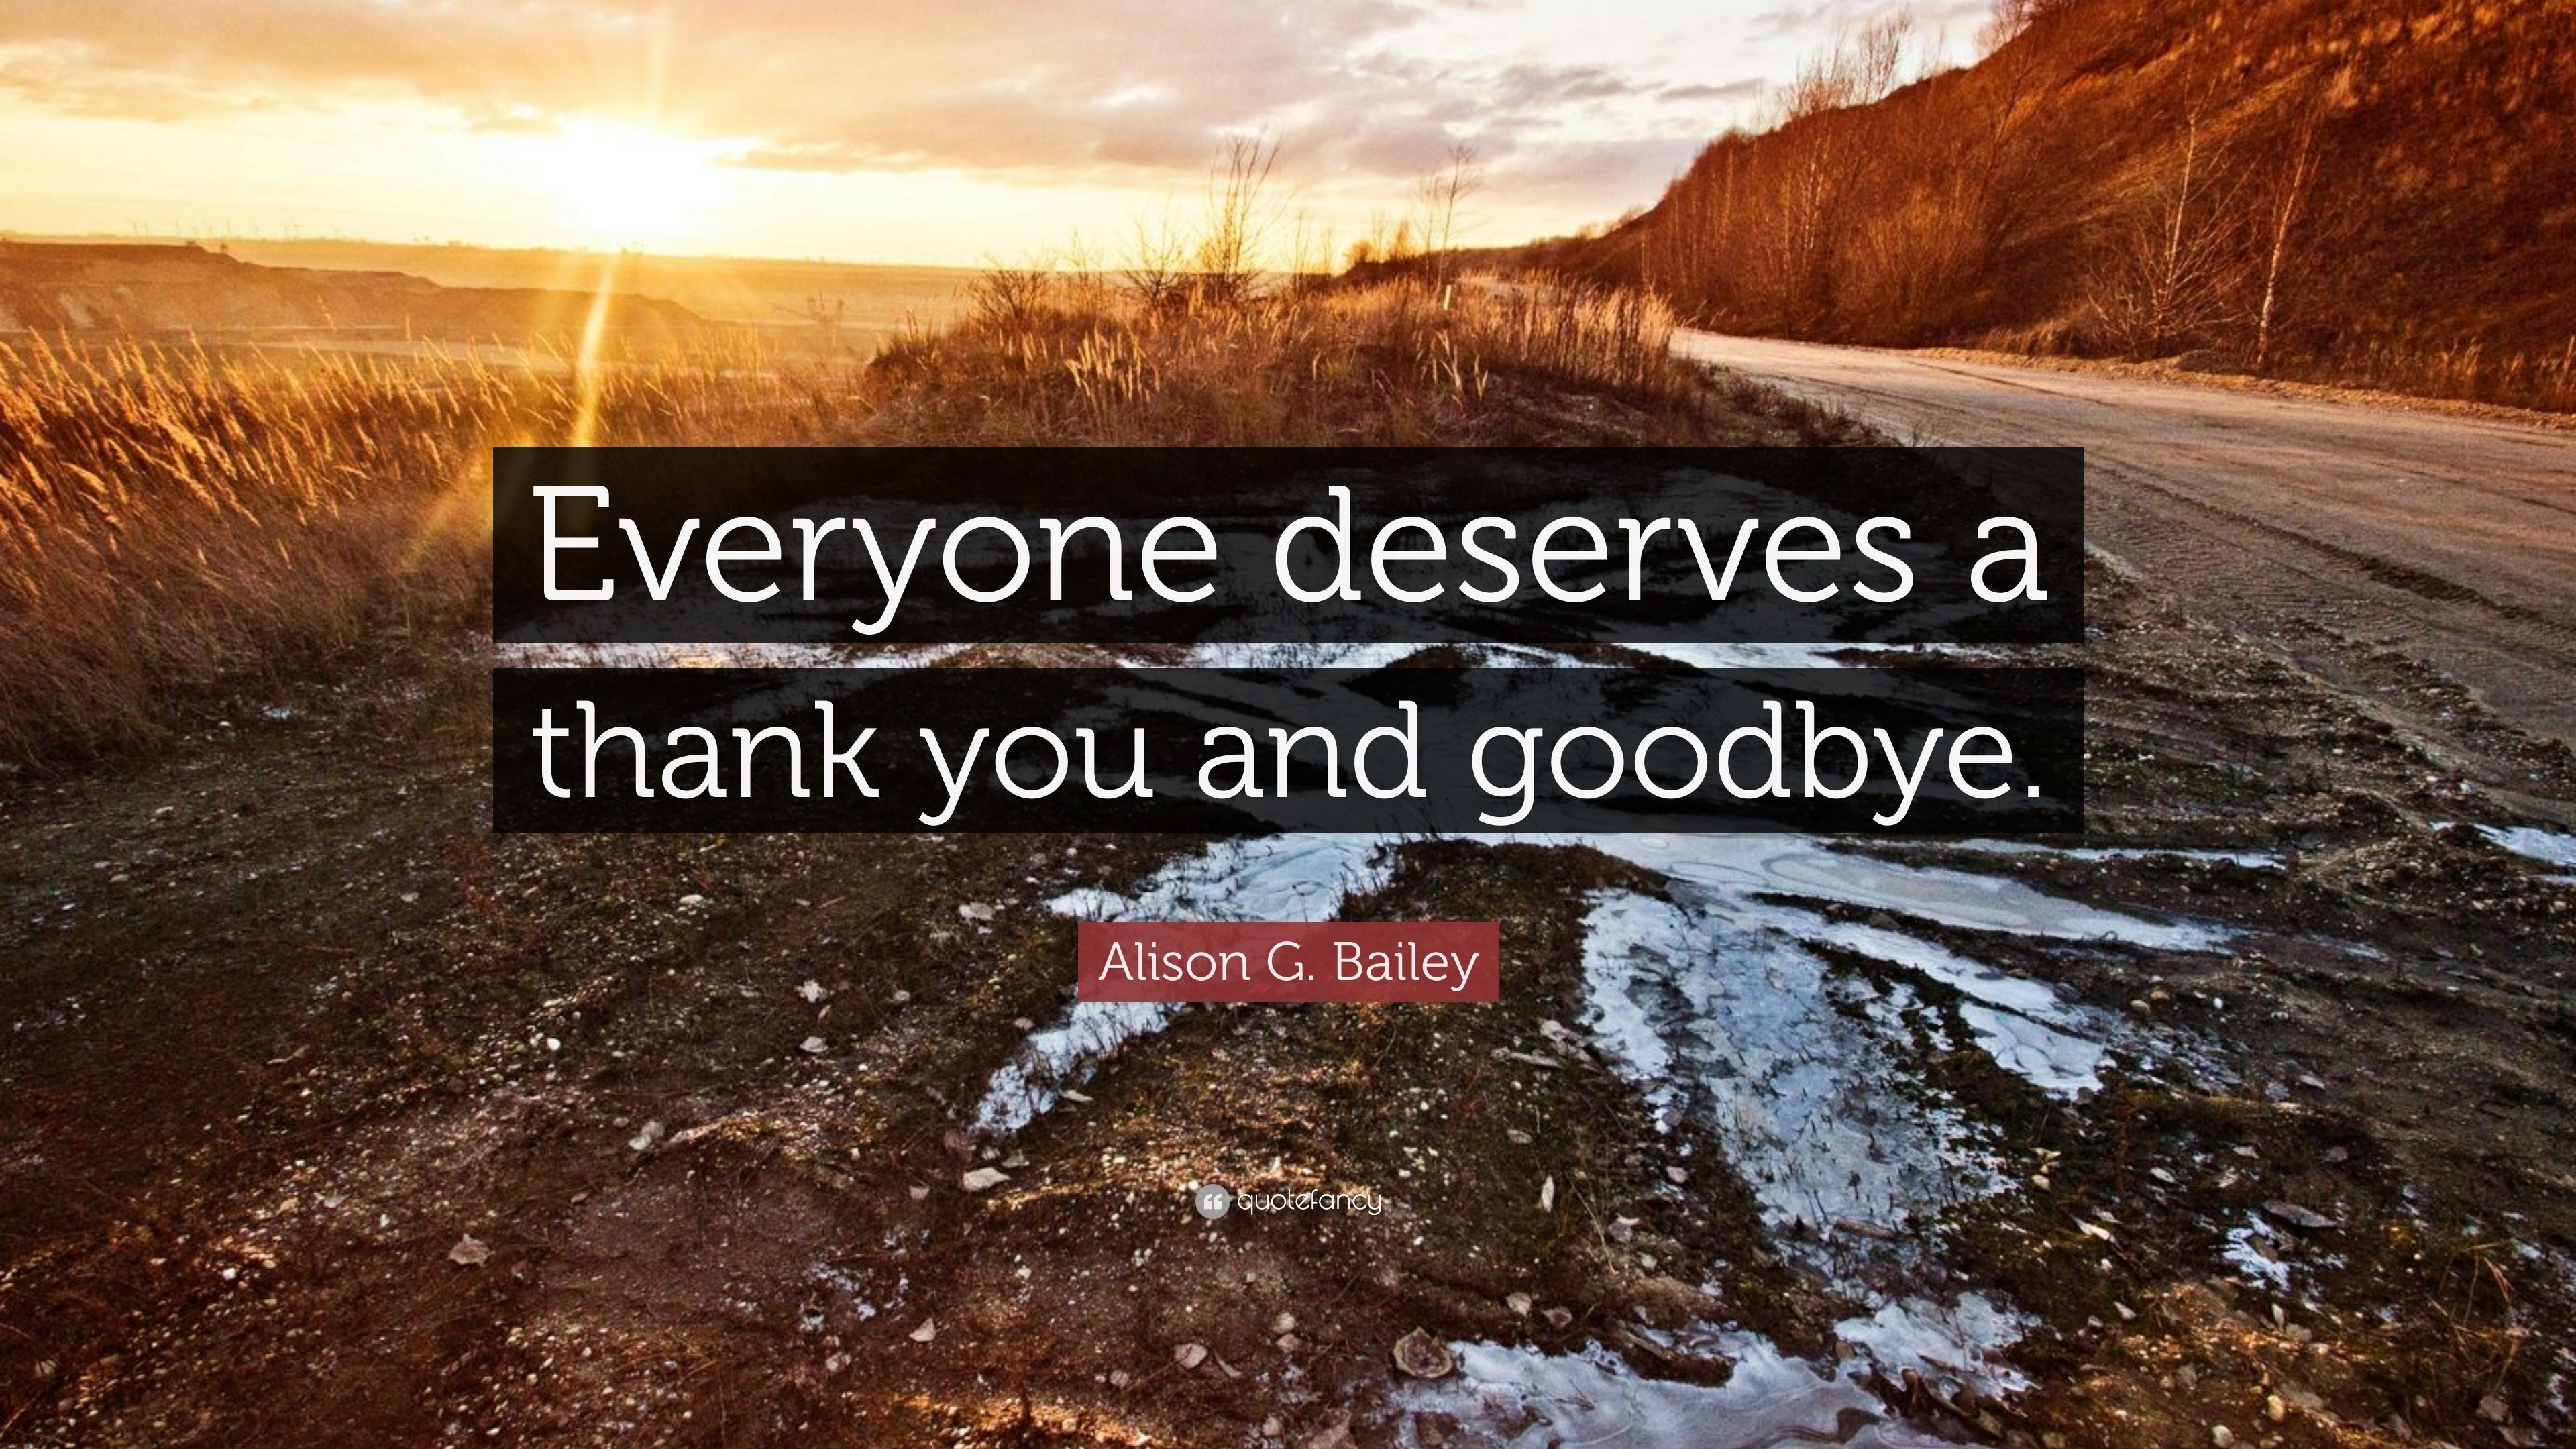 3840x2160 Alison G. Bailey Quote: “Everyone deserves a thank you and goodbye.”